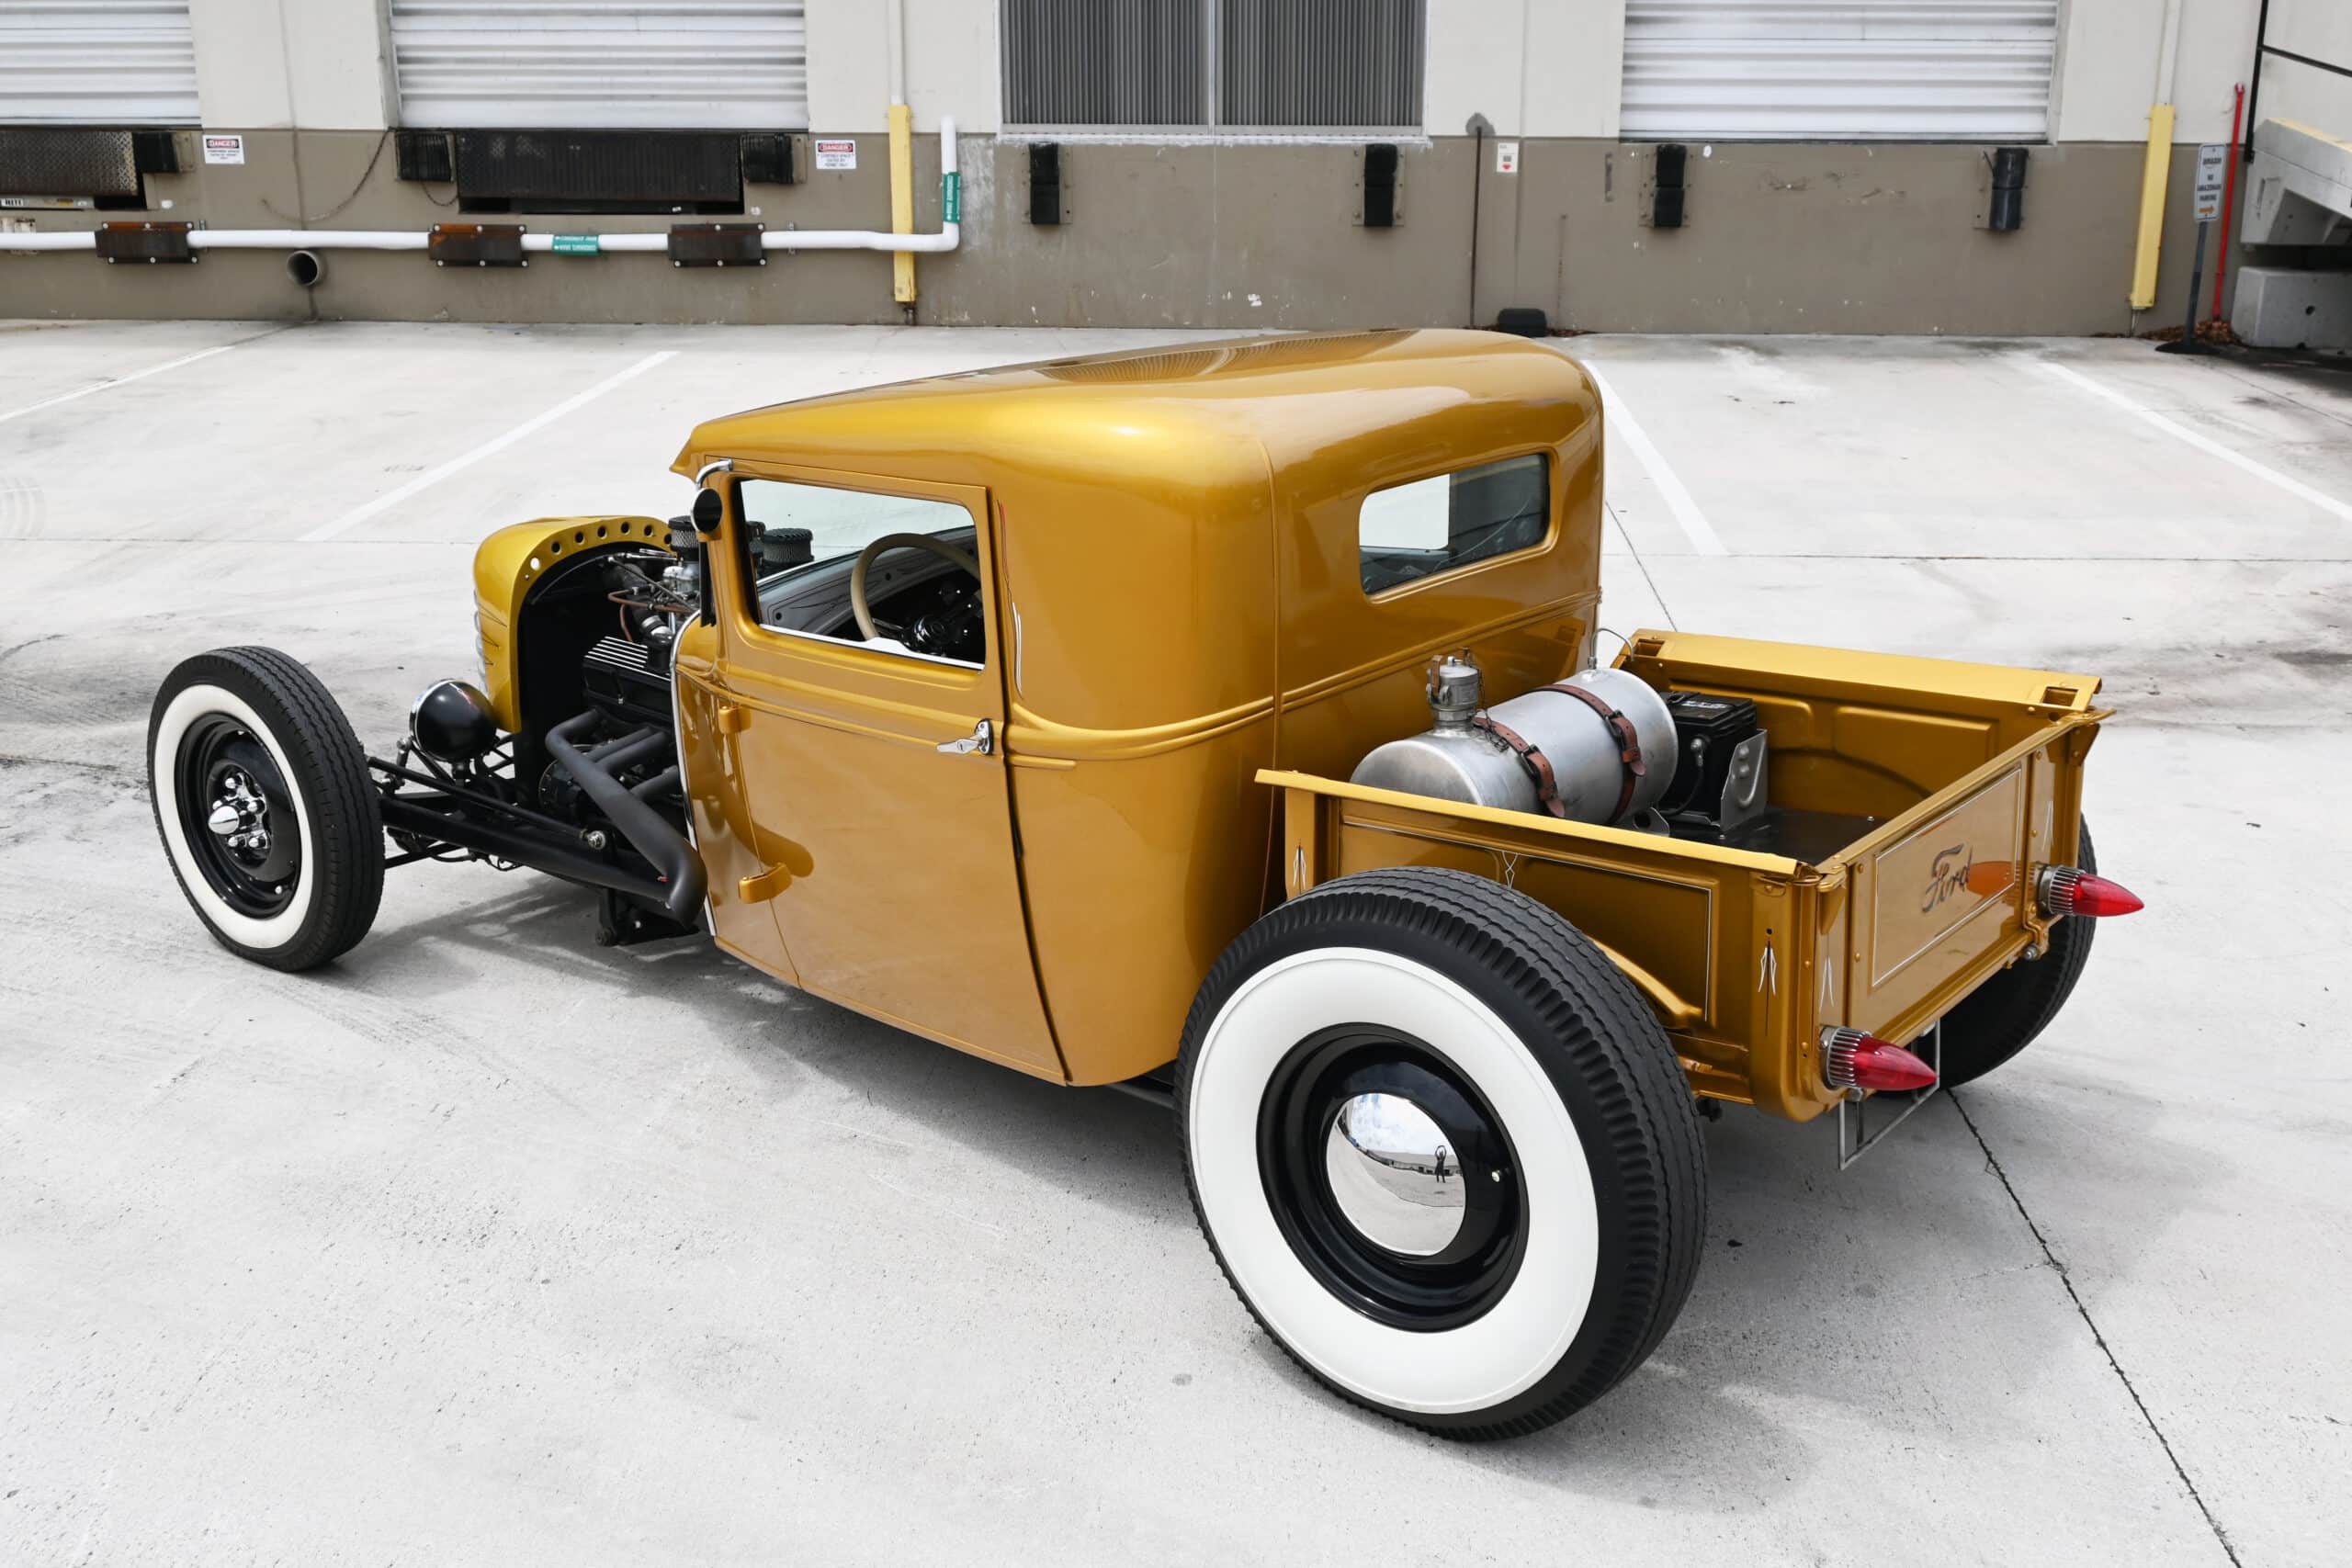 1930 Ford Model A Hot Rod / Rad Rod Hot Rod -Rat Rod – Street Road – $30K to build plus the value of the car!!! SOLID STEEL BODY – FAST AND RELIABLE – 5.7 LITER – 5 SPEED